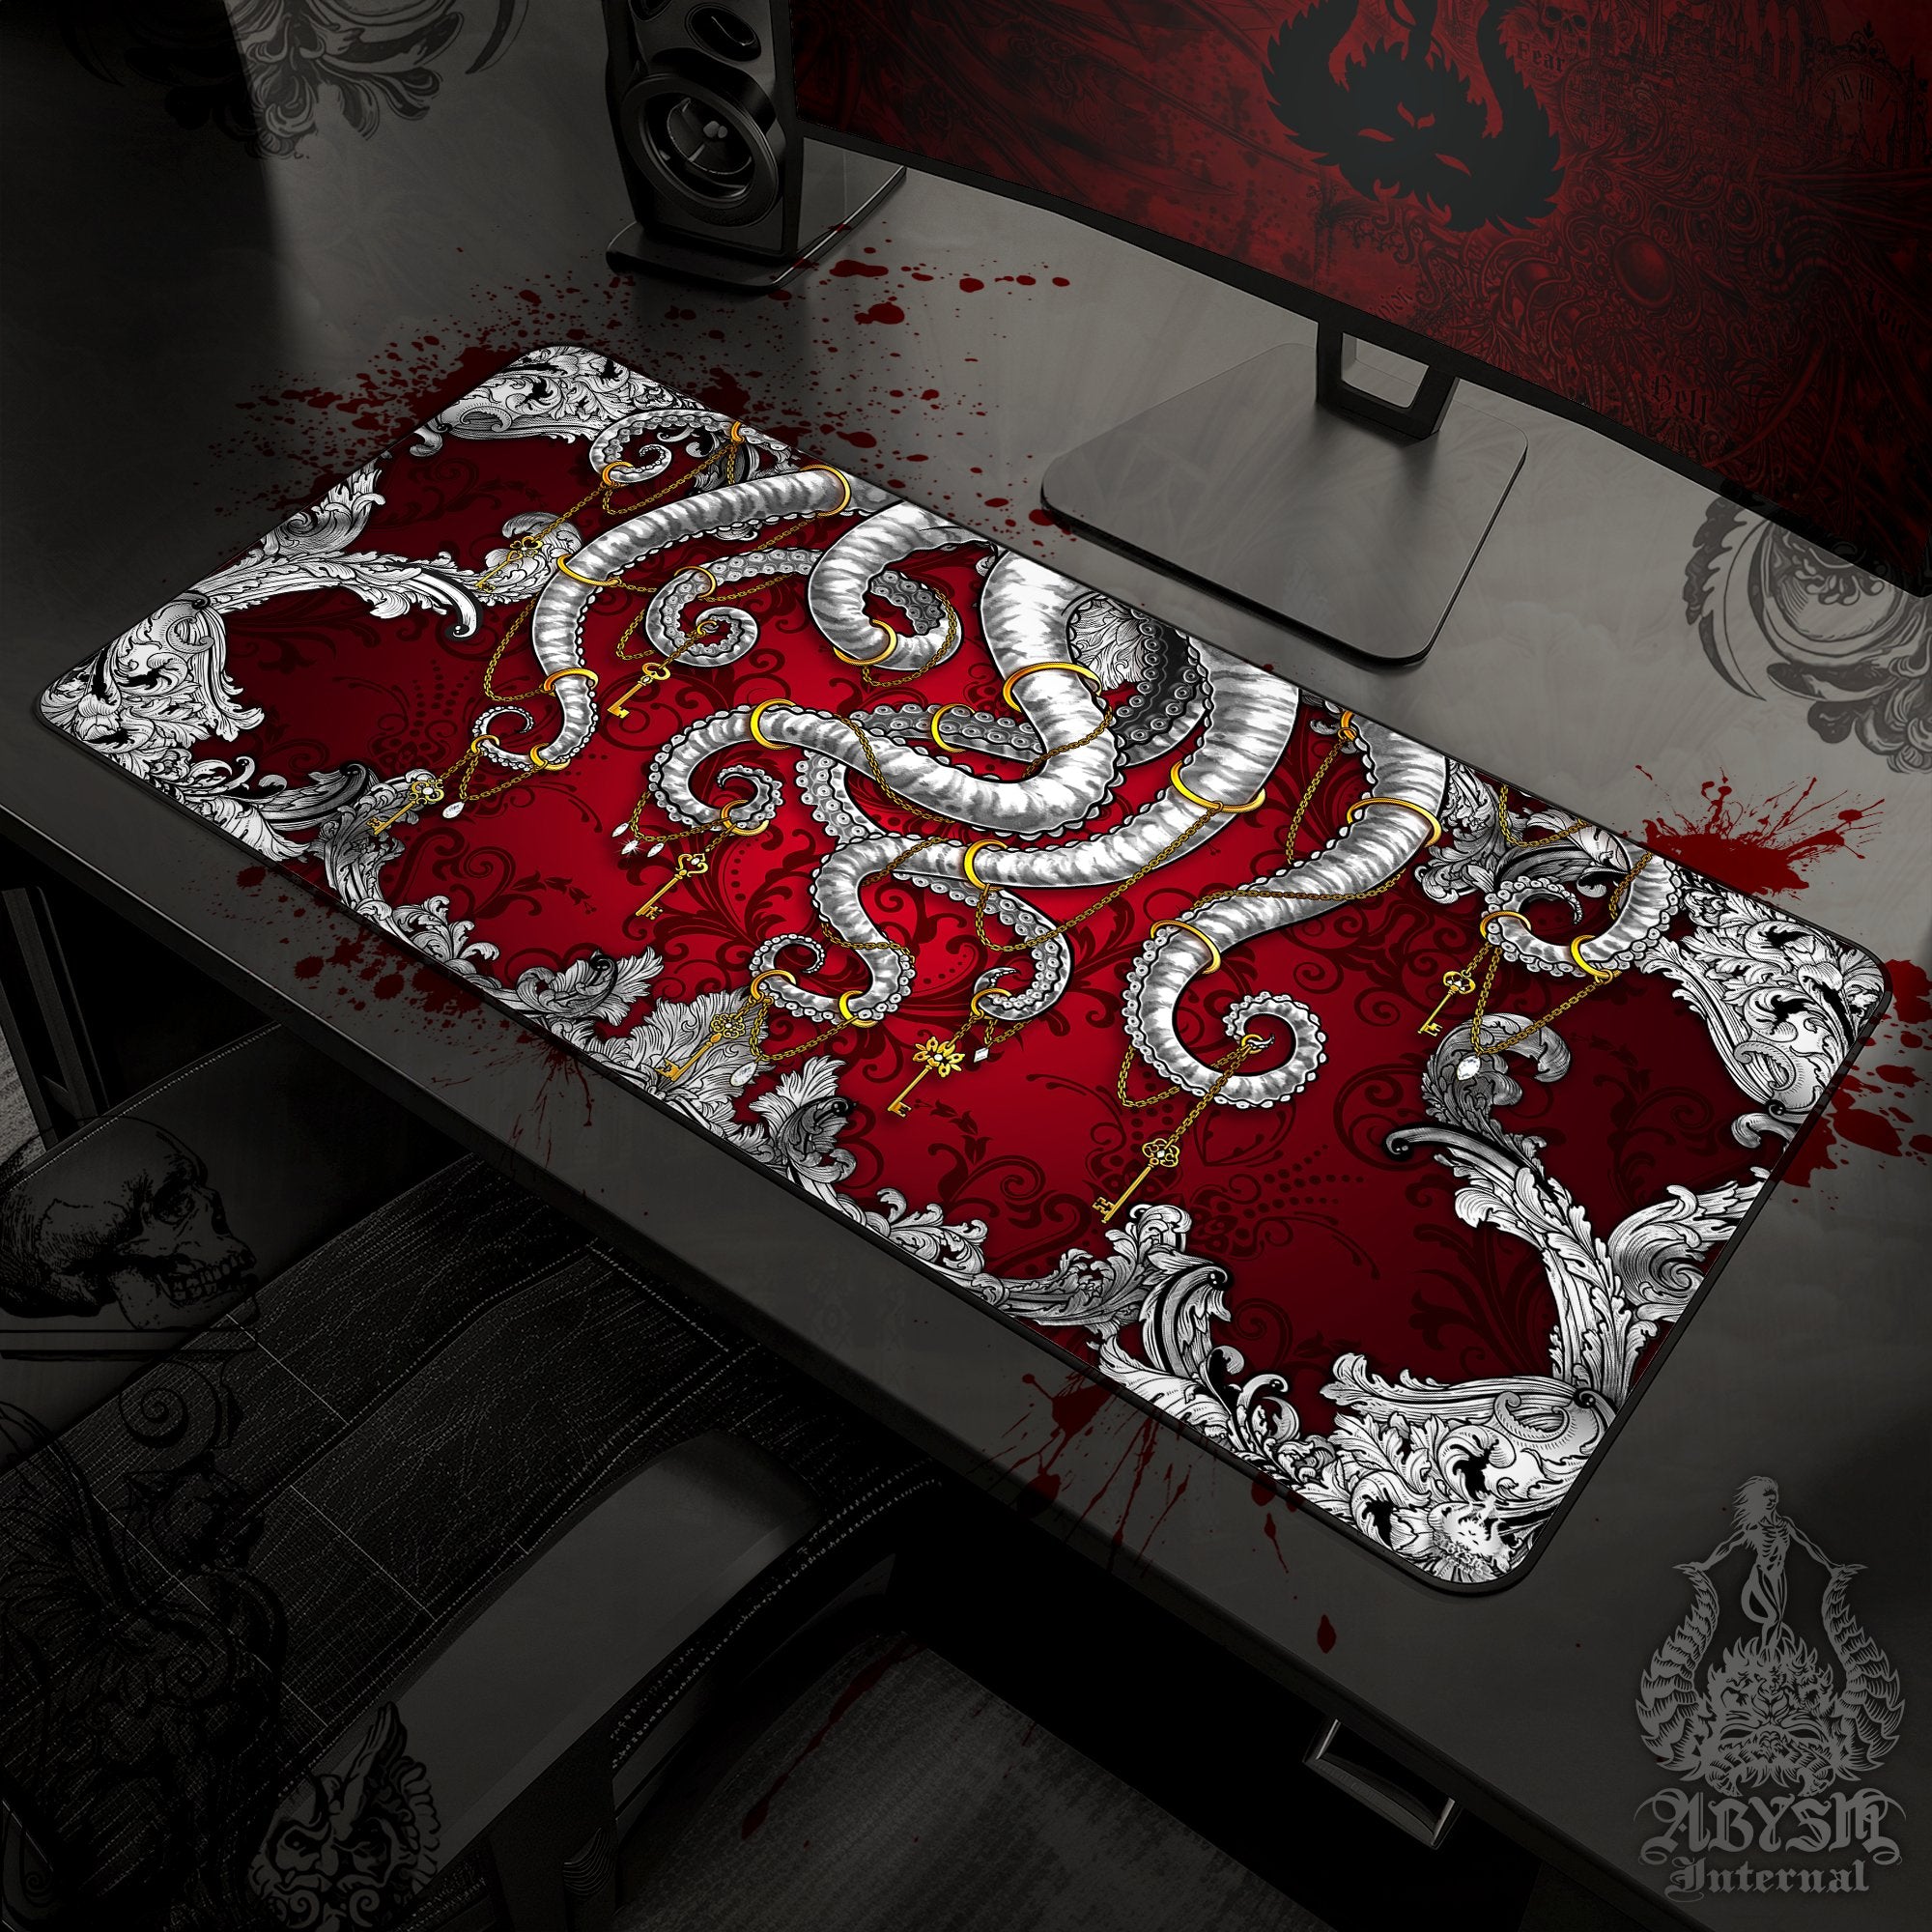 Silver Octopus Gaming Mouse Pad, Tentacles Desk Mat, Gamer Table Protector Cover, Colorful Workpad, Fantasy Art Print - 2 Colors - Abysm Internal